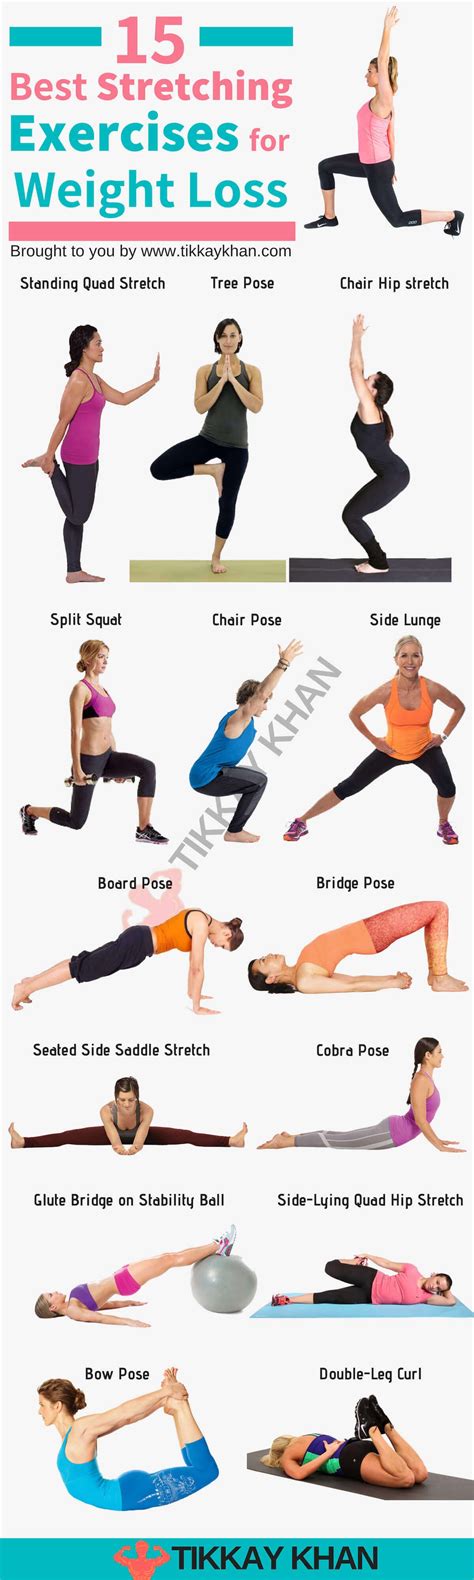 Exercise for weight loss